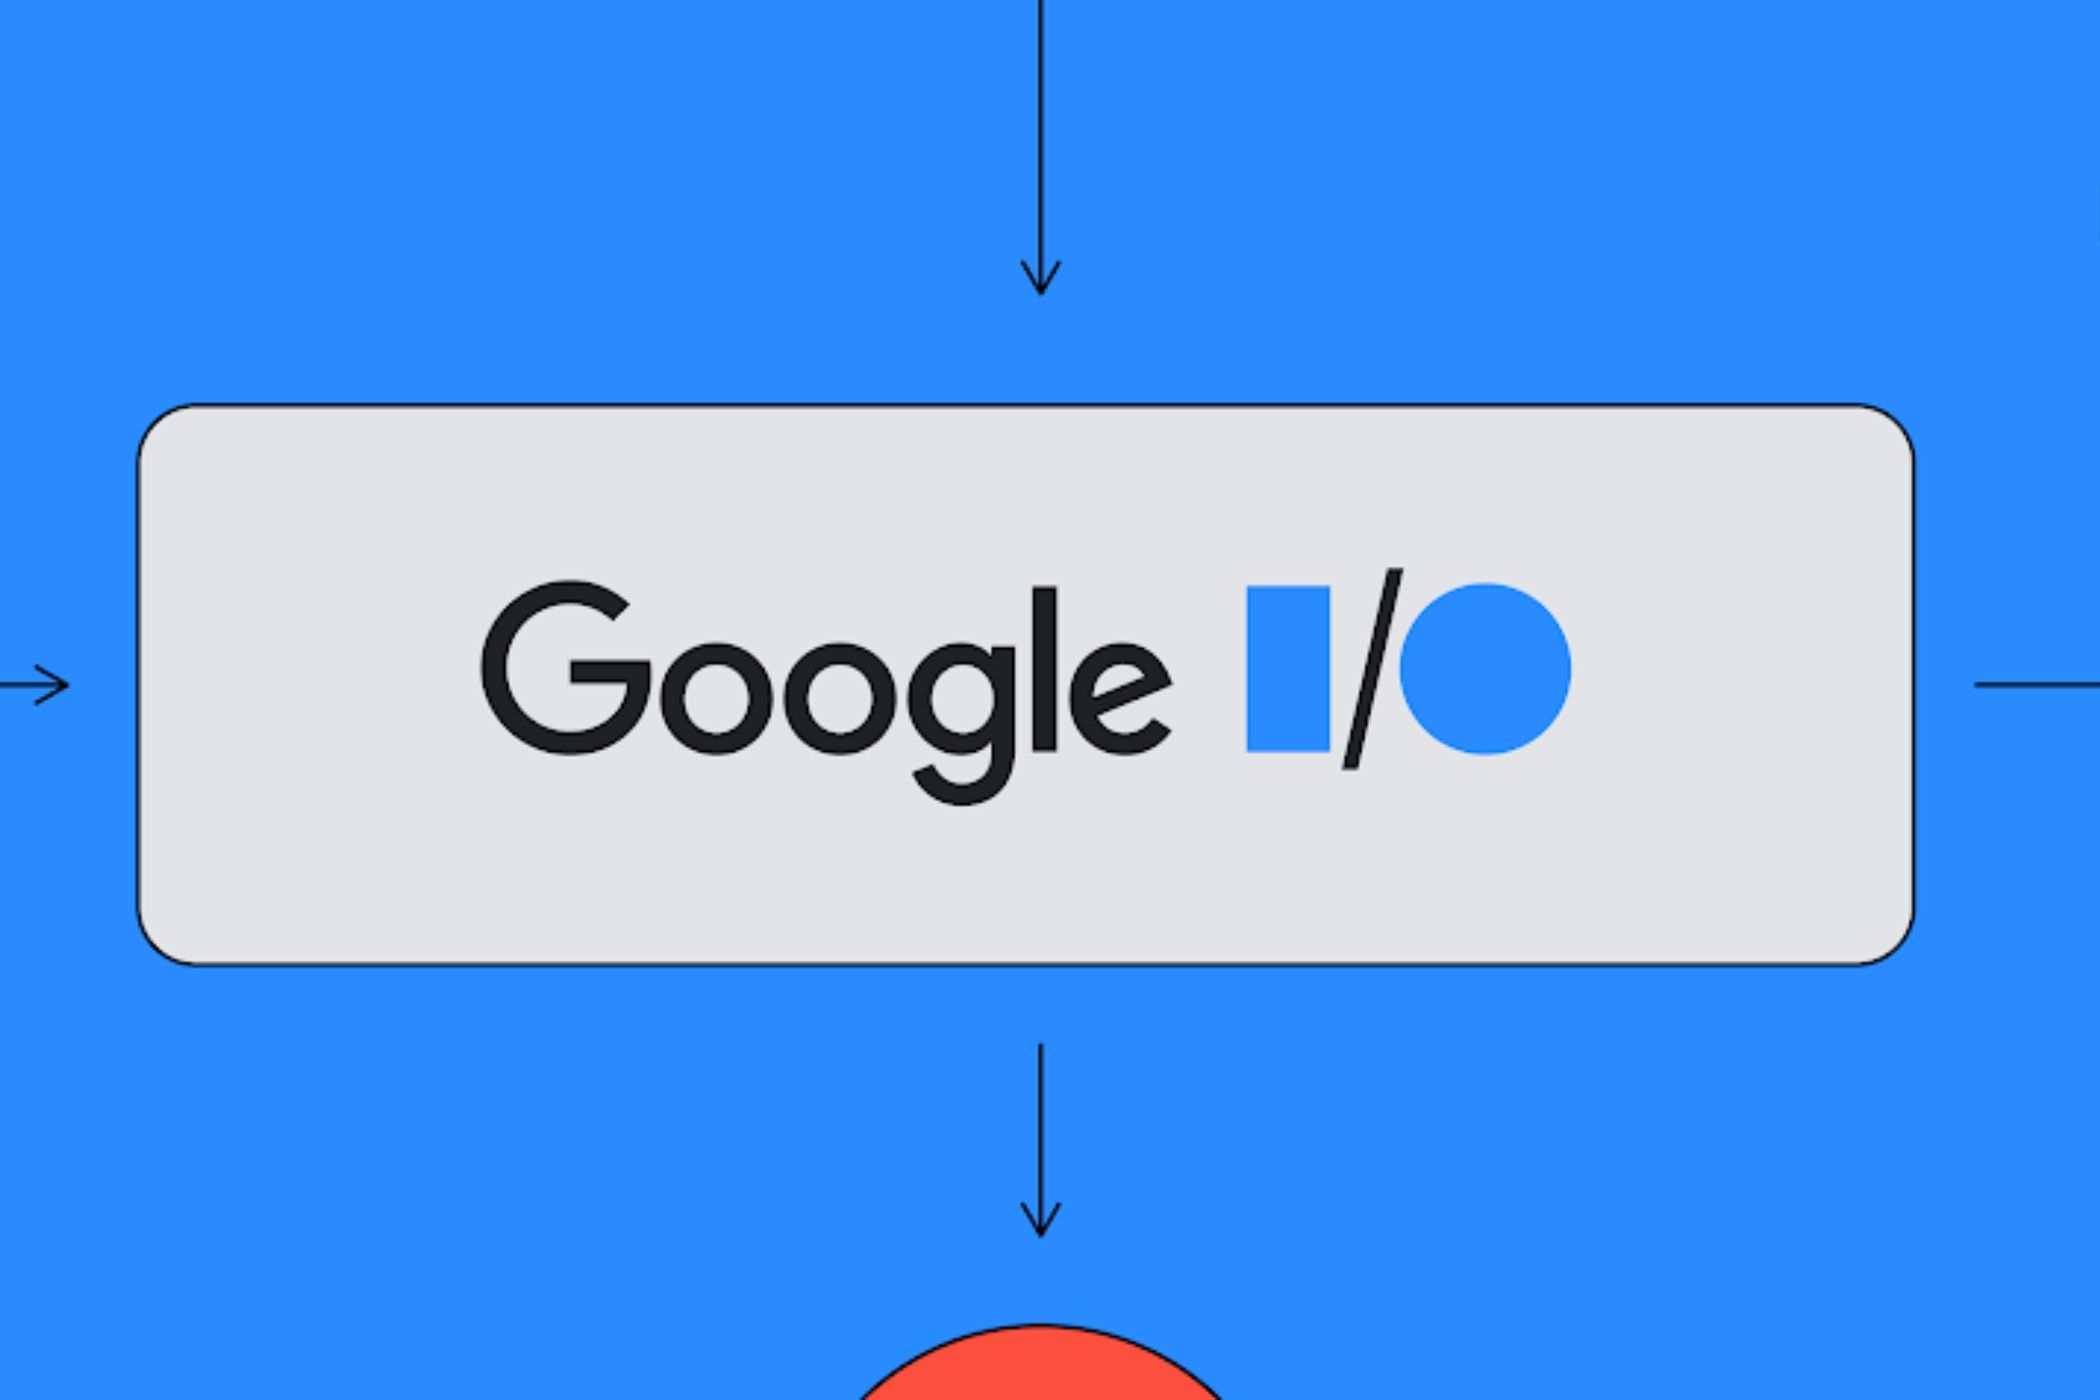 A Google I/O illustration with the Google I/O text written over a blue-colored background.